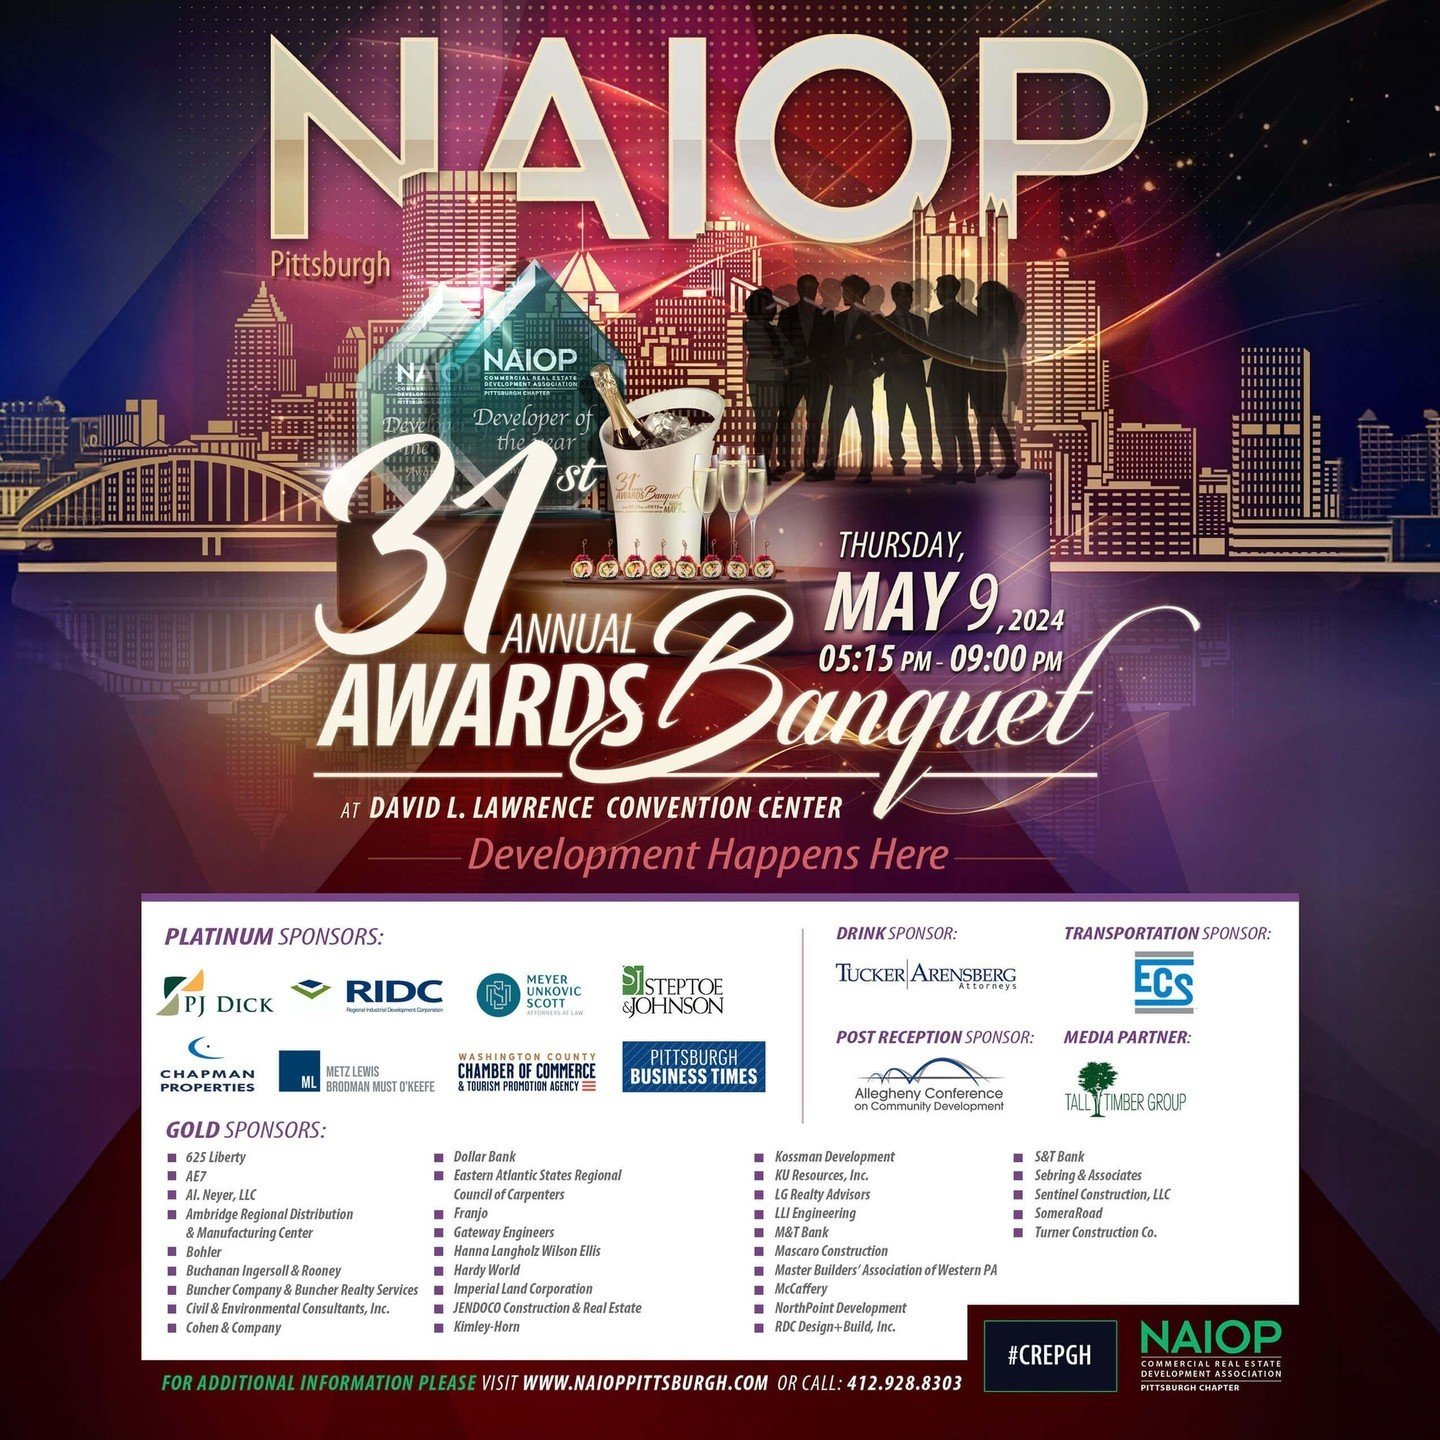 This is your final reminder that our 2024 Awards Banquet ticket sales 🎟️ END this Wednesday, May 1st!! 🏆⁠ Link in bio.⁠
https://bit.ly/2024NAIOPpittsburghAwards⁠
⁠
Join us for the 31st Annual NAIOP Pittsburgh Awards Banquet, on May 9th as we honor 